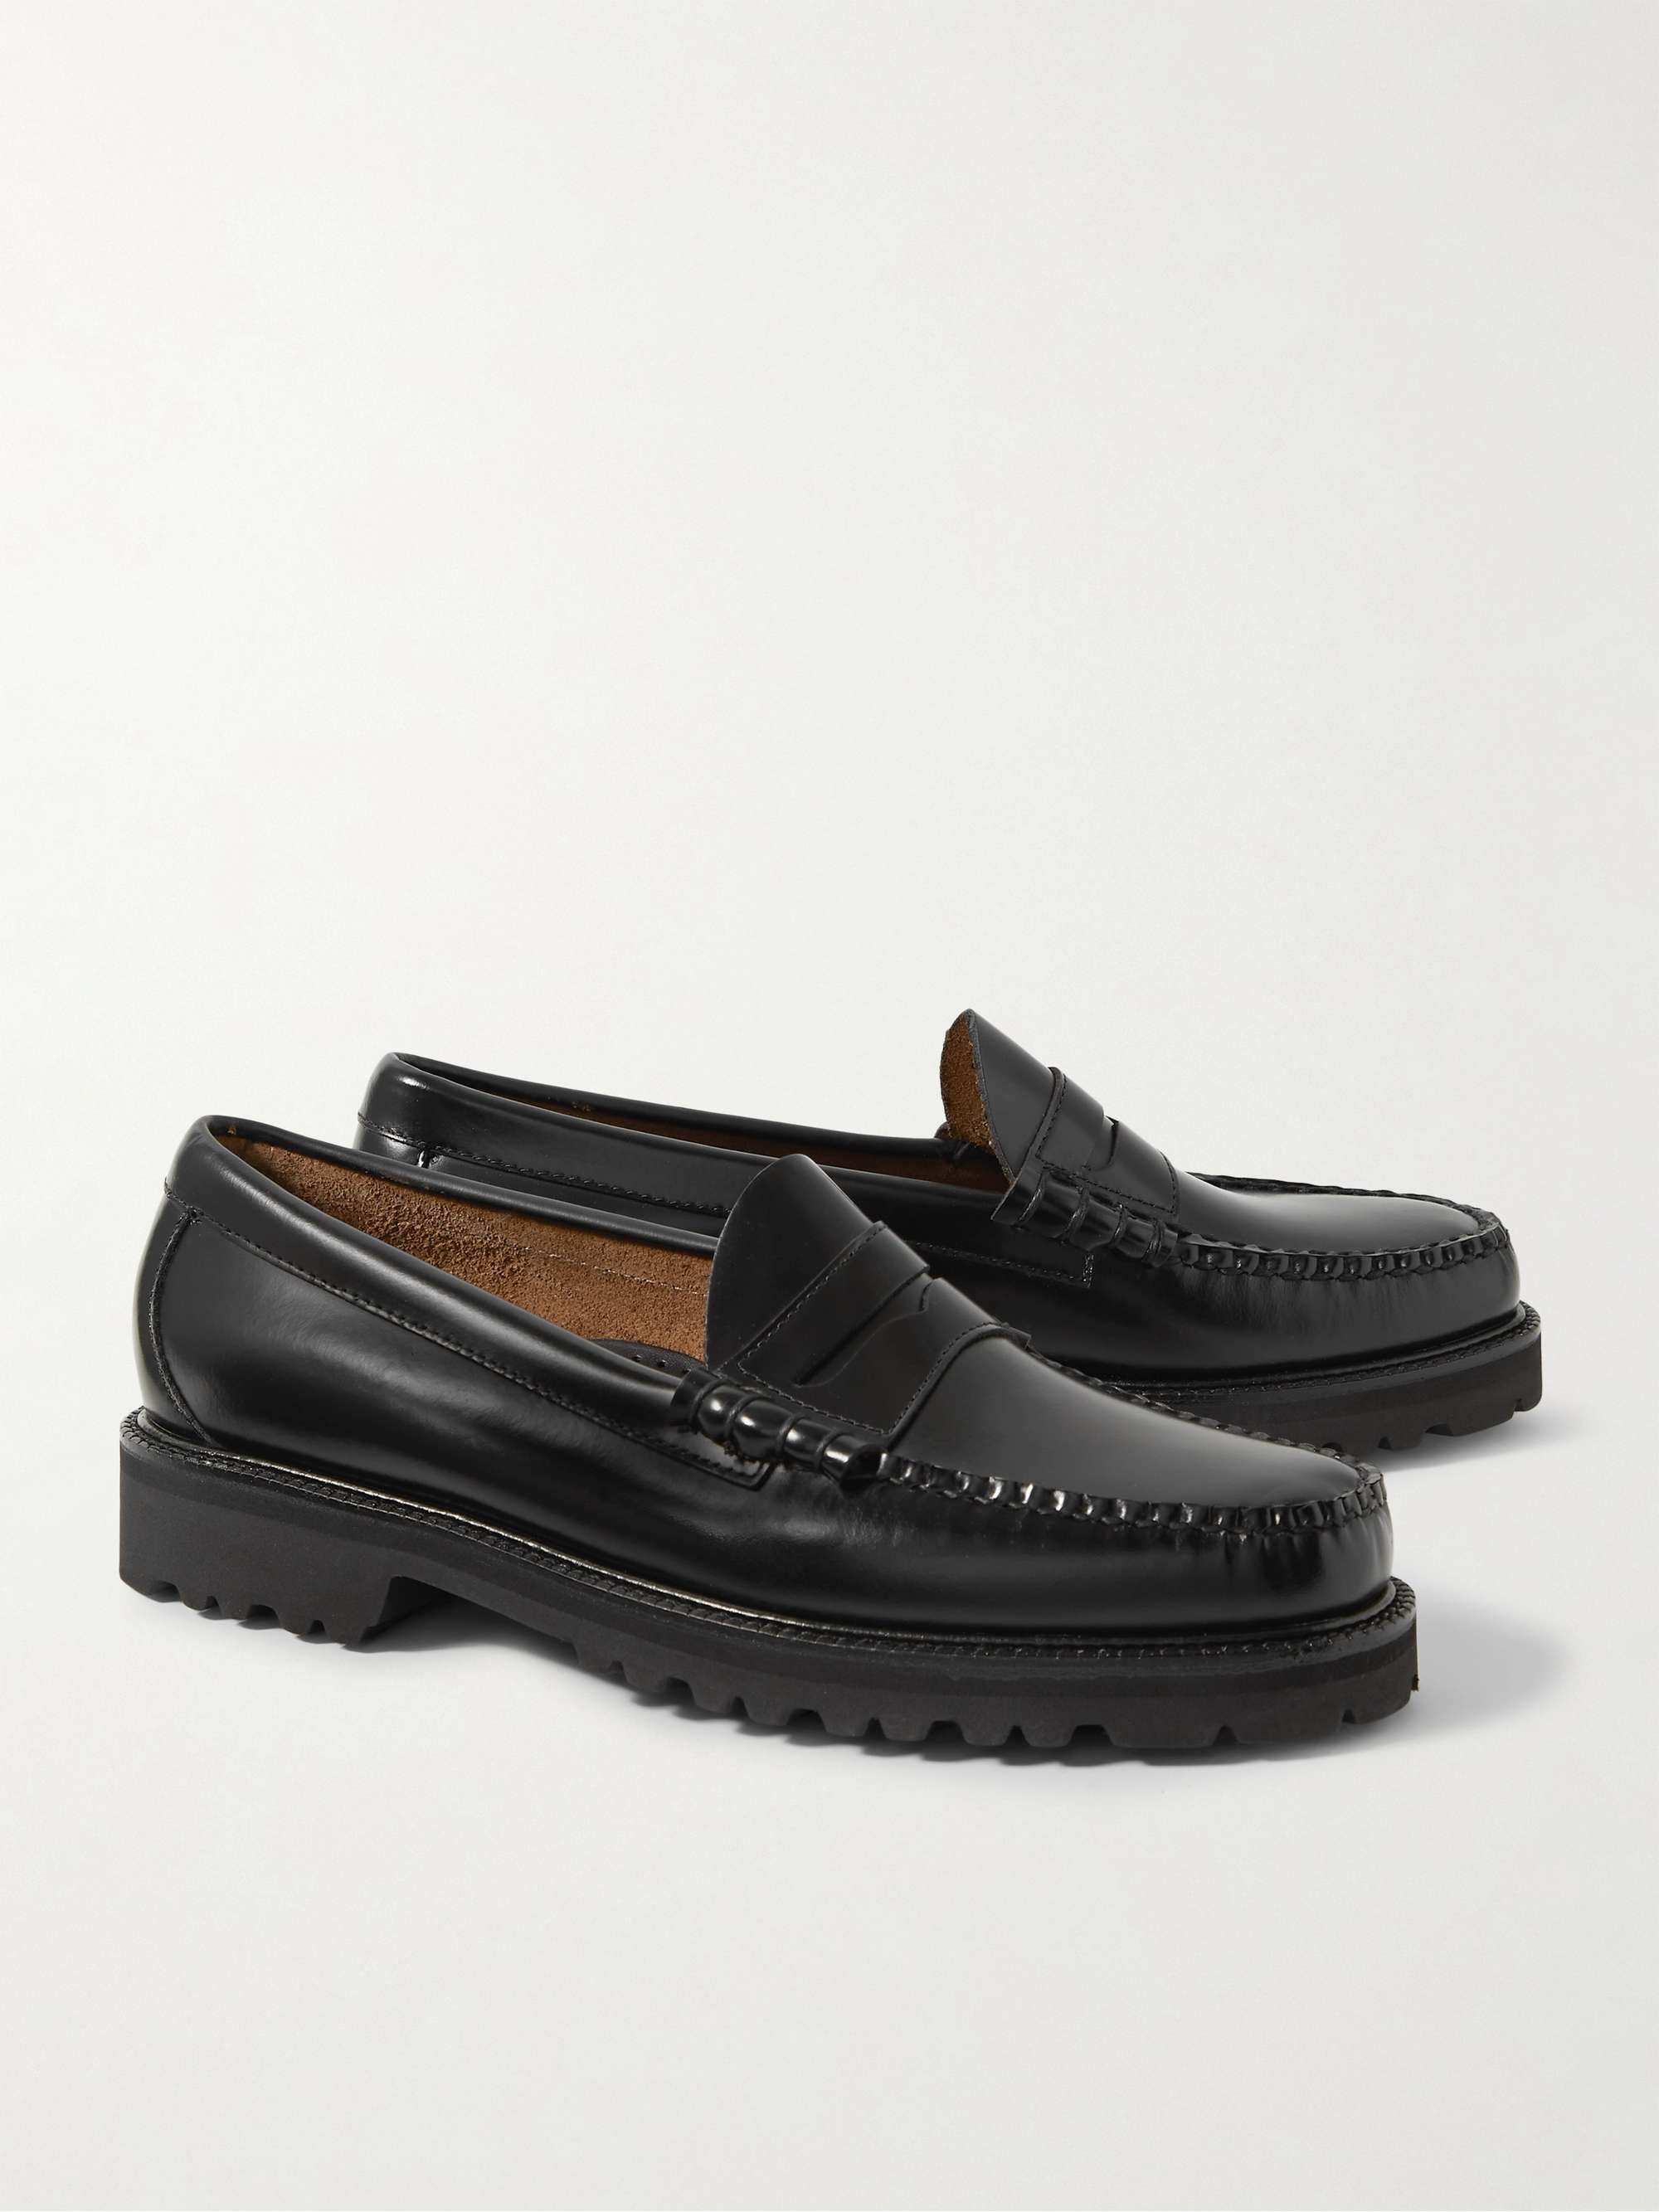 G.H. BASS & CO. Weejuns 90 Larson Leather Penny Loafers | MR PORTER